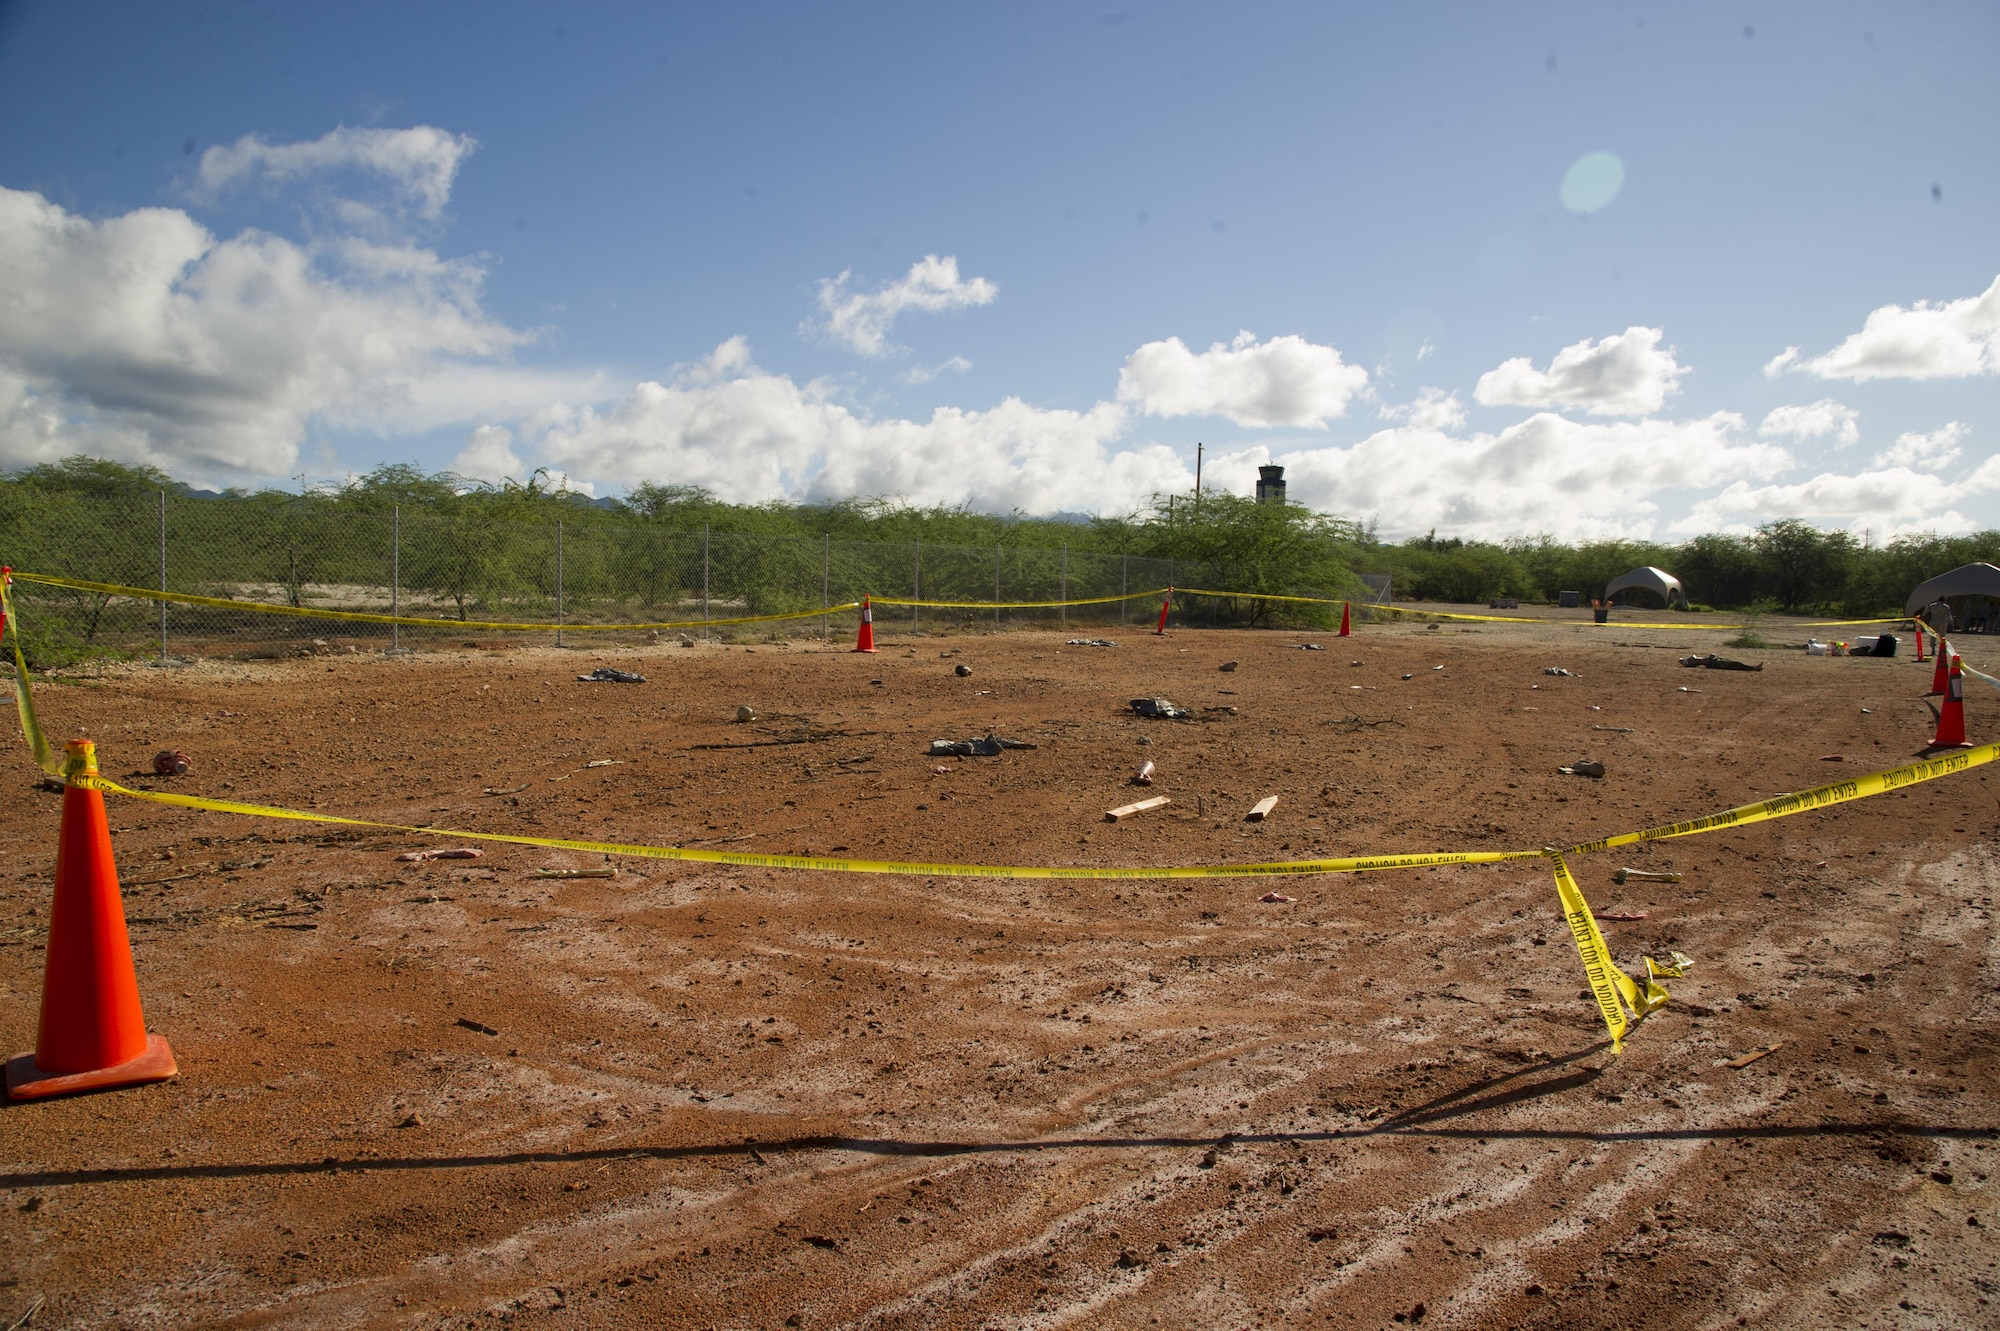 Props simulate an aircraft incident during the search and recovery team’s training event on Joint Base Pearl Harbor-Hickam, Hawaii, Oct. 27, 2017. The search and recovery team is tasked with recovering human remains from accident sites. (U.S. Air Force photo by Tech. Sgt. Heather Redman)